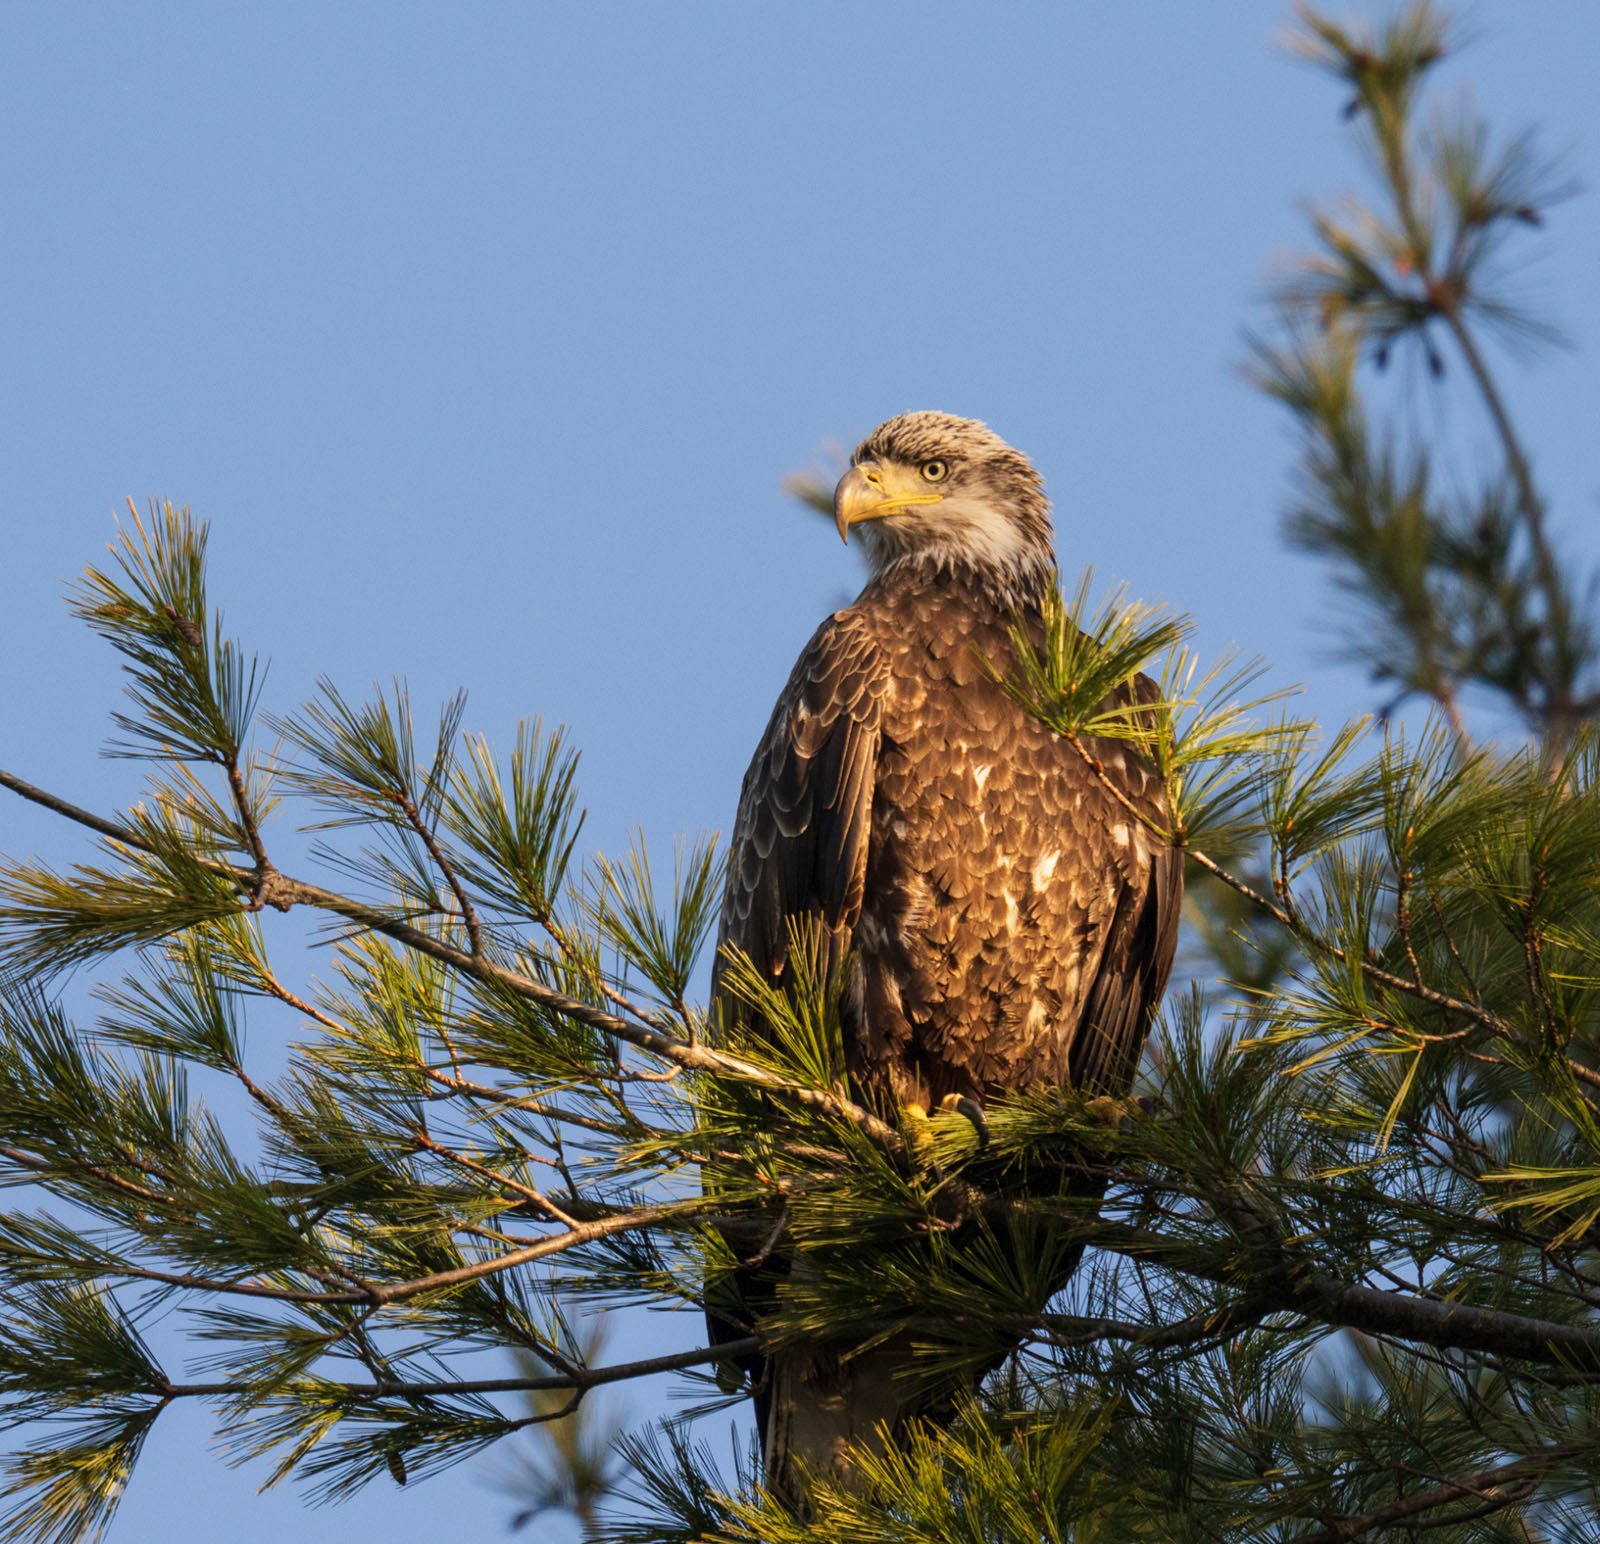 A majestic juvenile bald eagle perched on the branches of a pine tree against a clear blue sky.